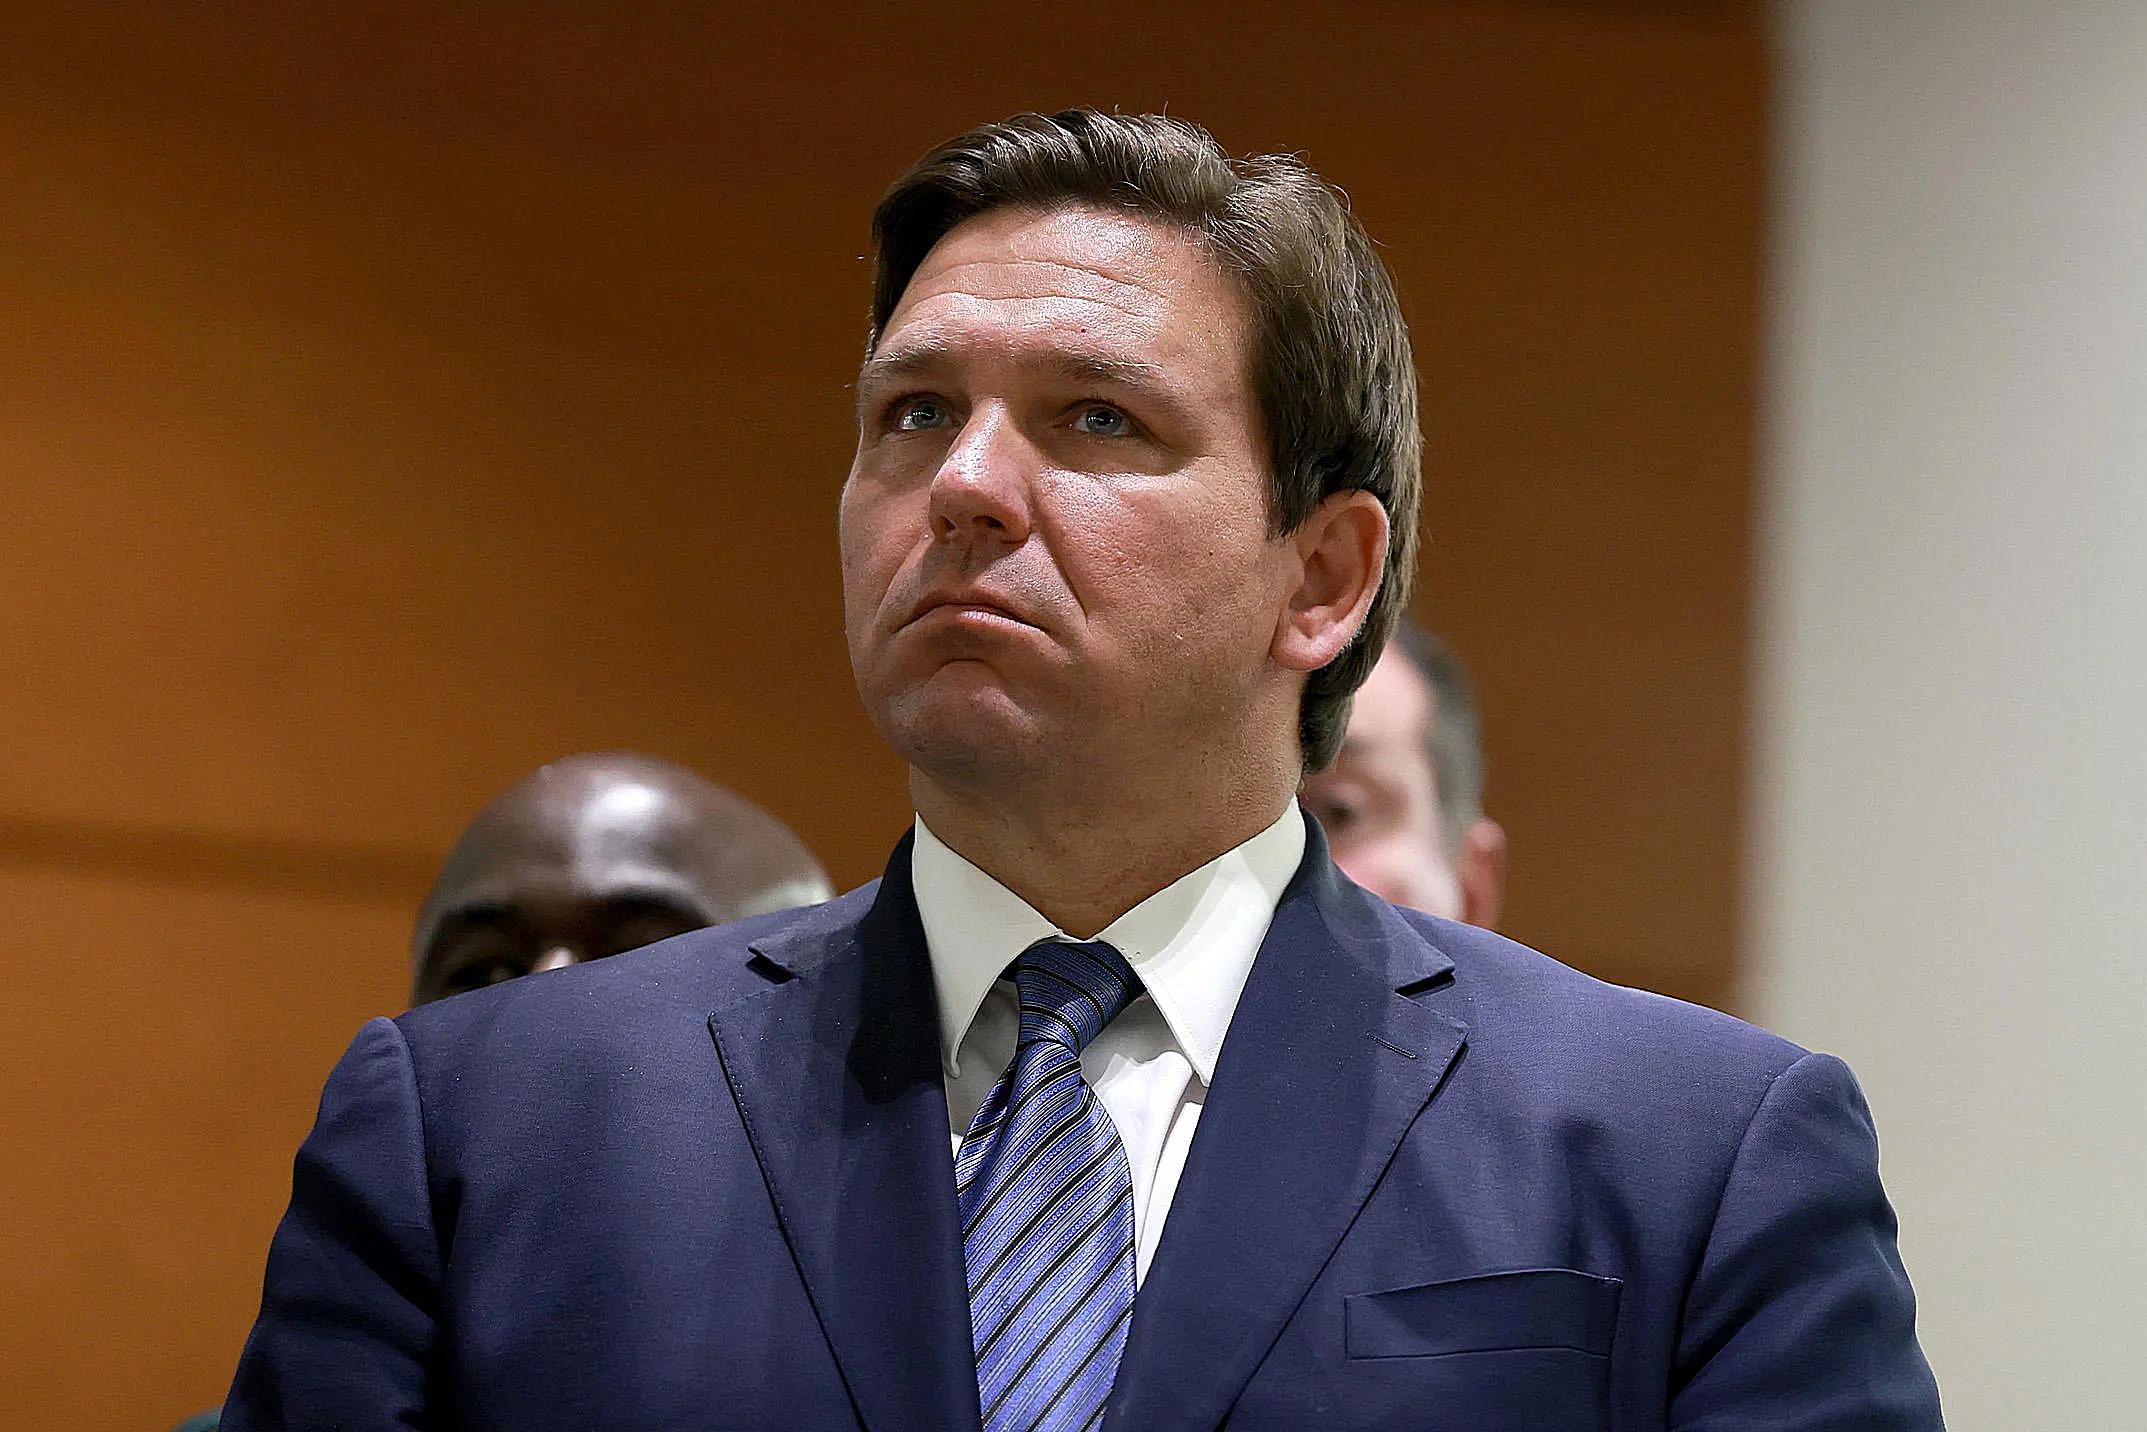 Gov. DeSantis warns that Citizens could go ‘belly up’ if insurance market not fixed